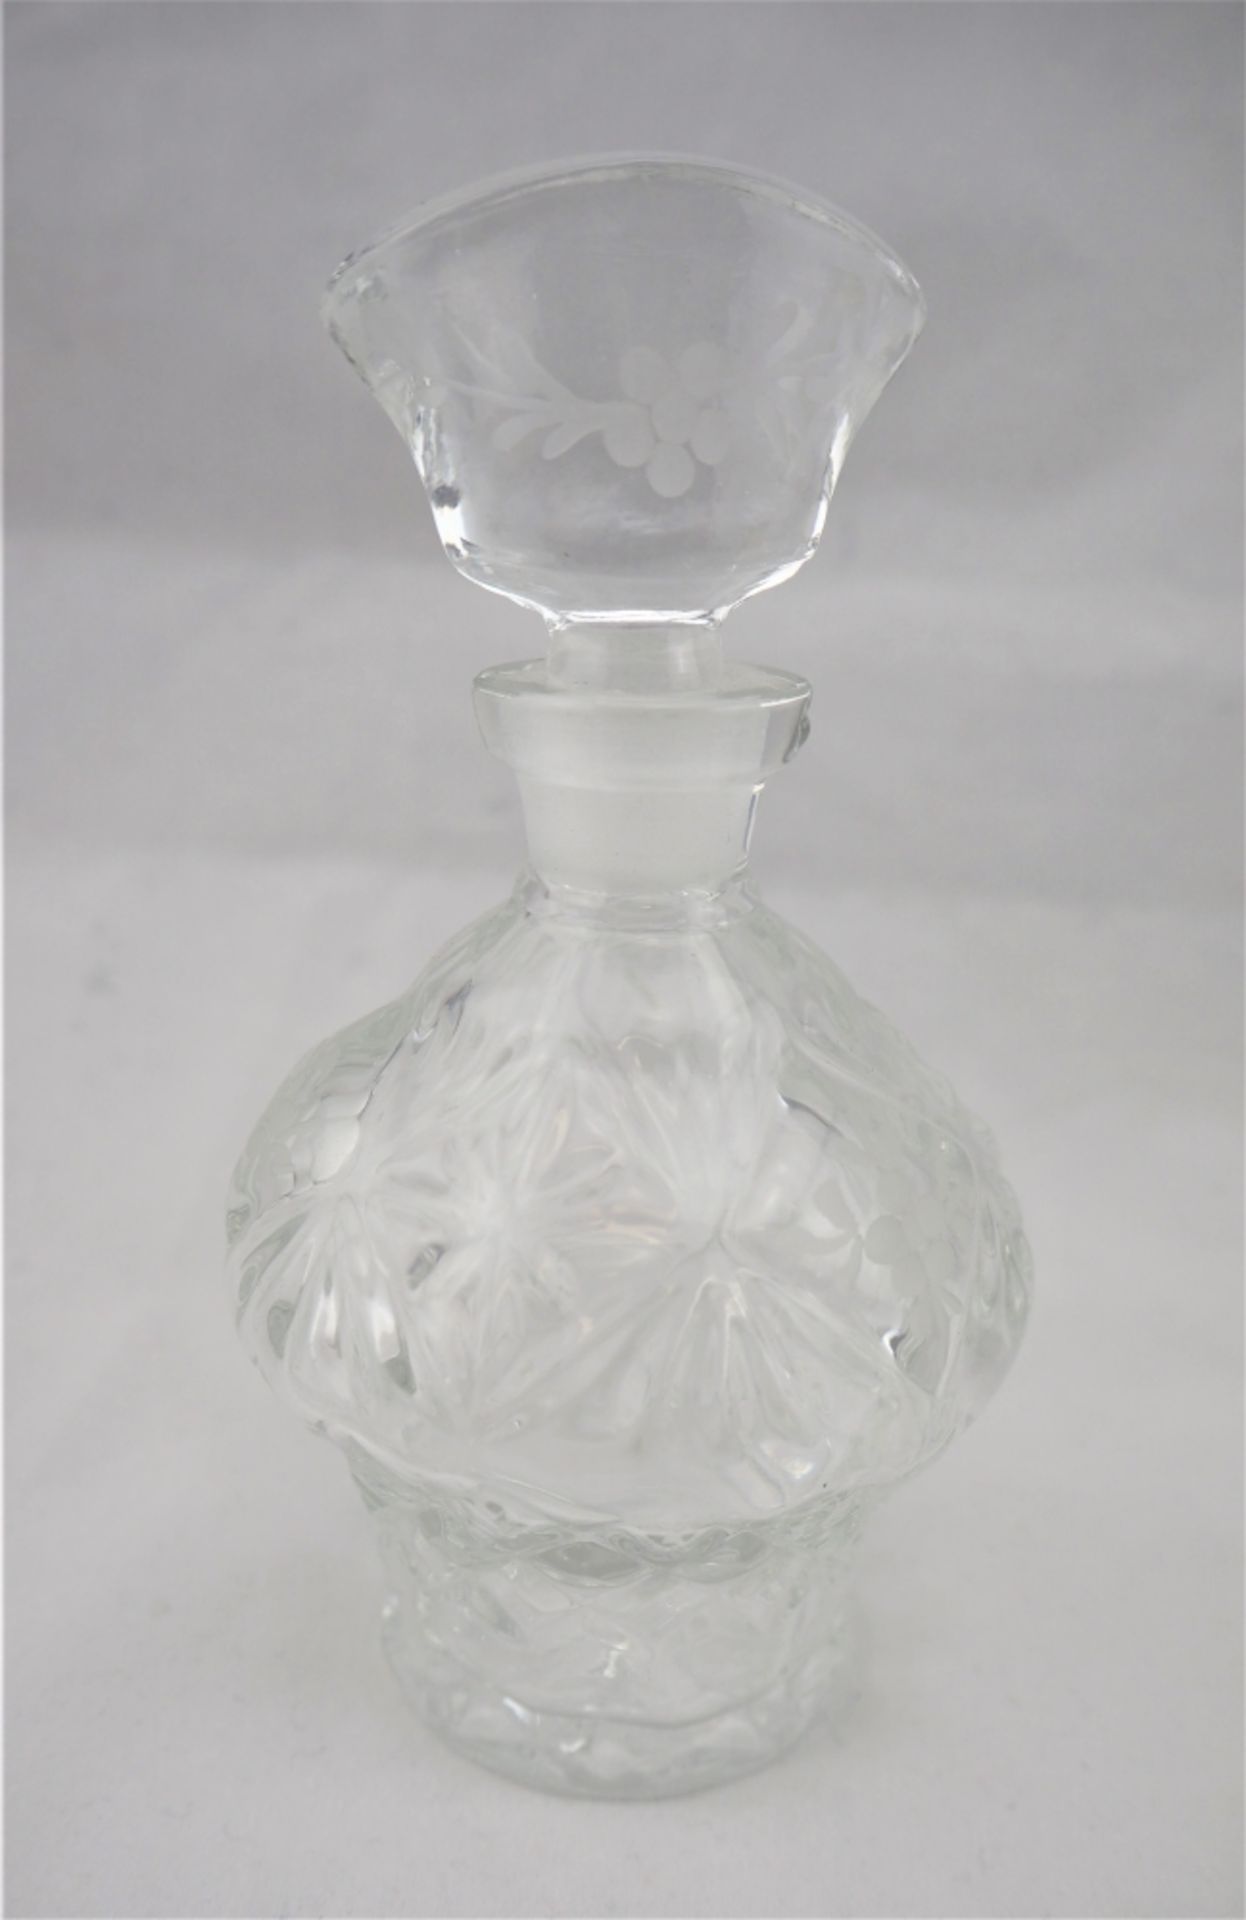 Convolute small carafes, 3 pieces - Image 2 of 3